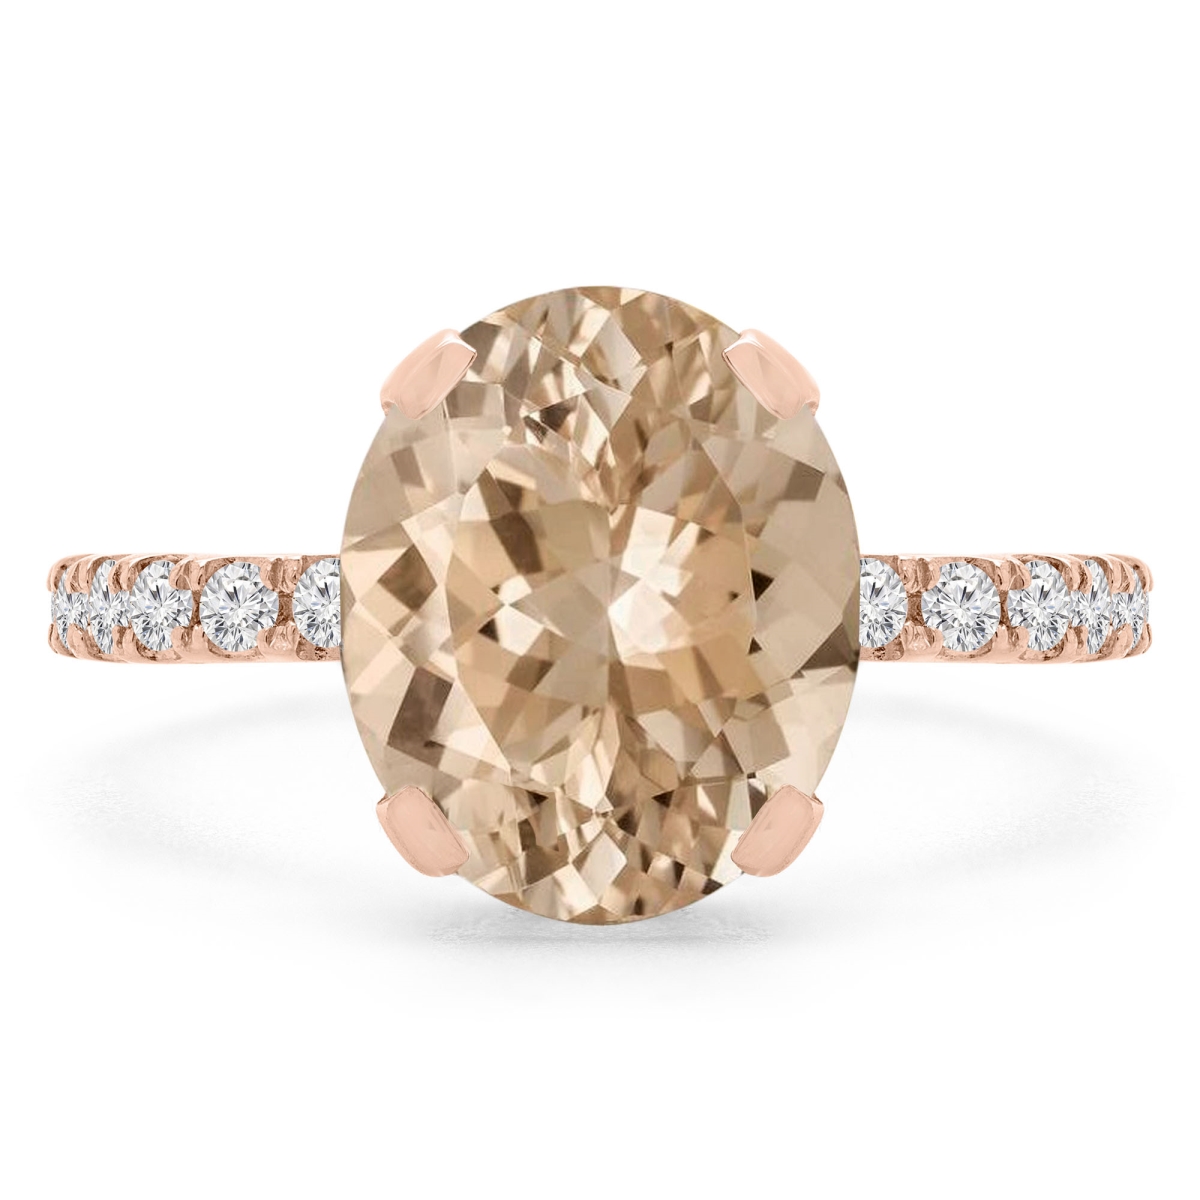 Picture of Majesty Diamonds MD190407-6 3.4 CTW Oval Pink Morganite Under Halo Engagement Ring in 14K Rose Gold - Size 6